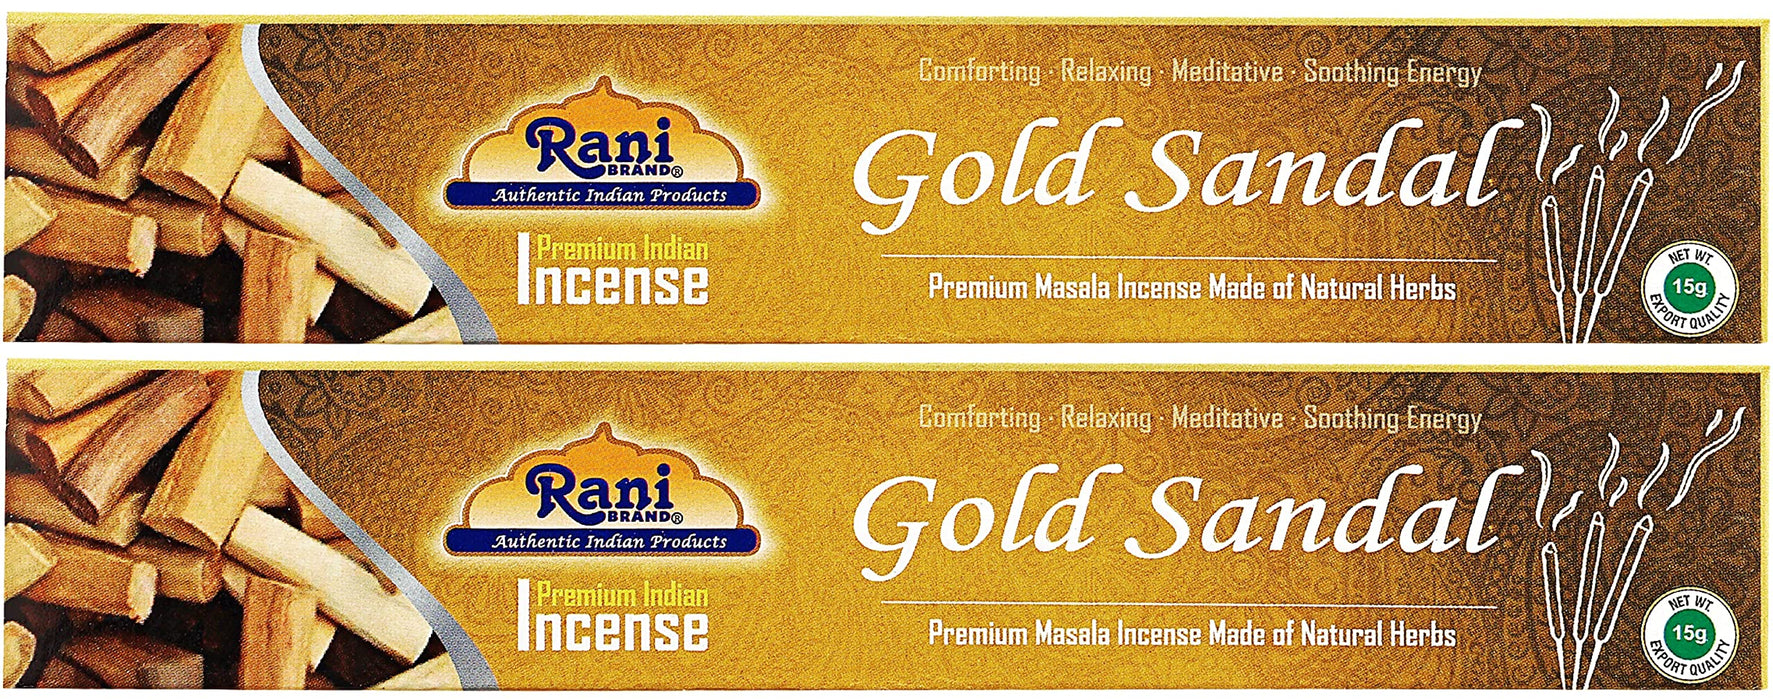 Rani Multi Pack Incense (Premium Masala Incense Made of Natural Herbs) 2 of Each Scents (Total of 12 Packets) ~ Total of 120 Incense sticks | For Puja Purposes | Indian Origin